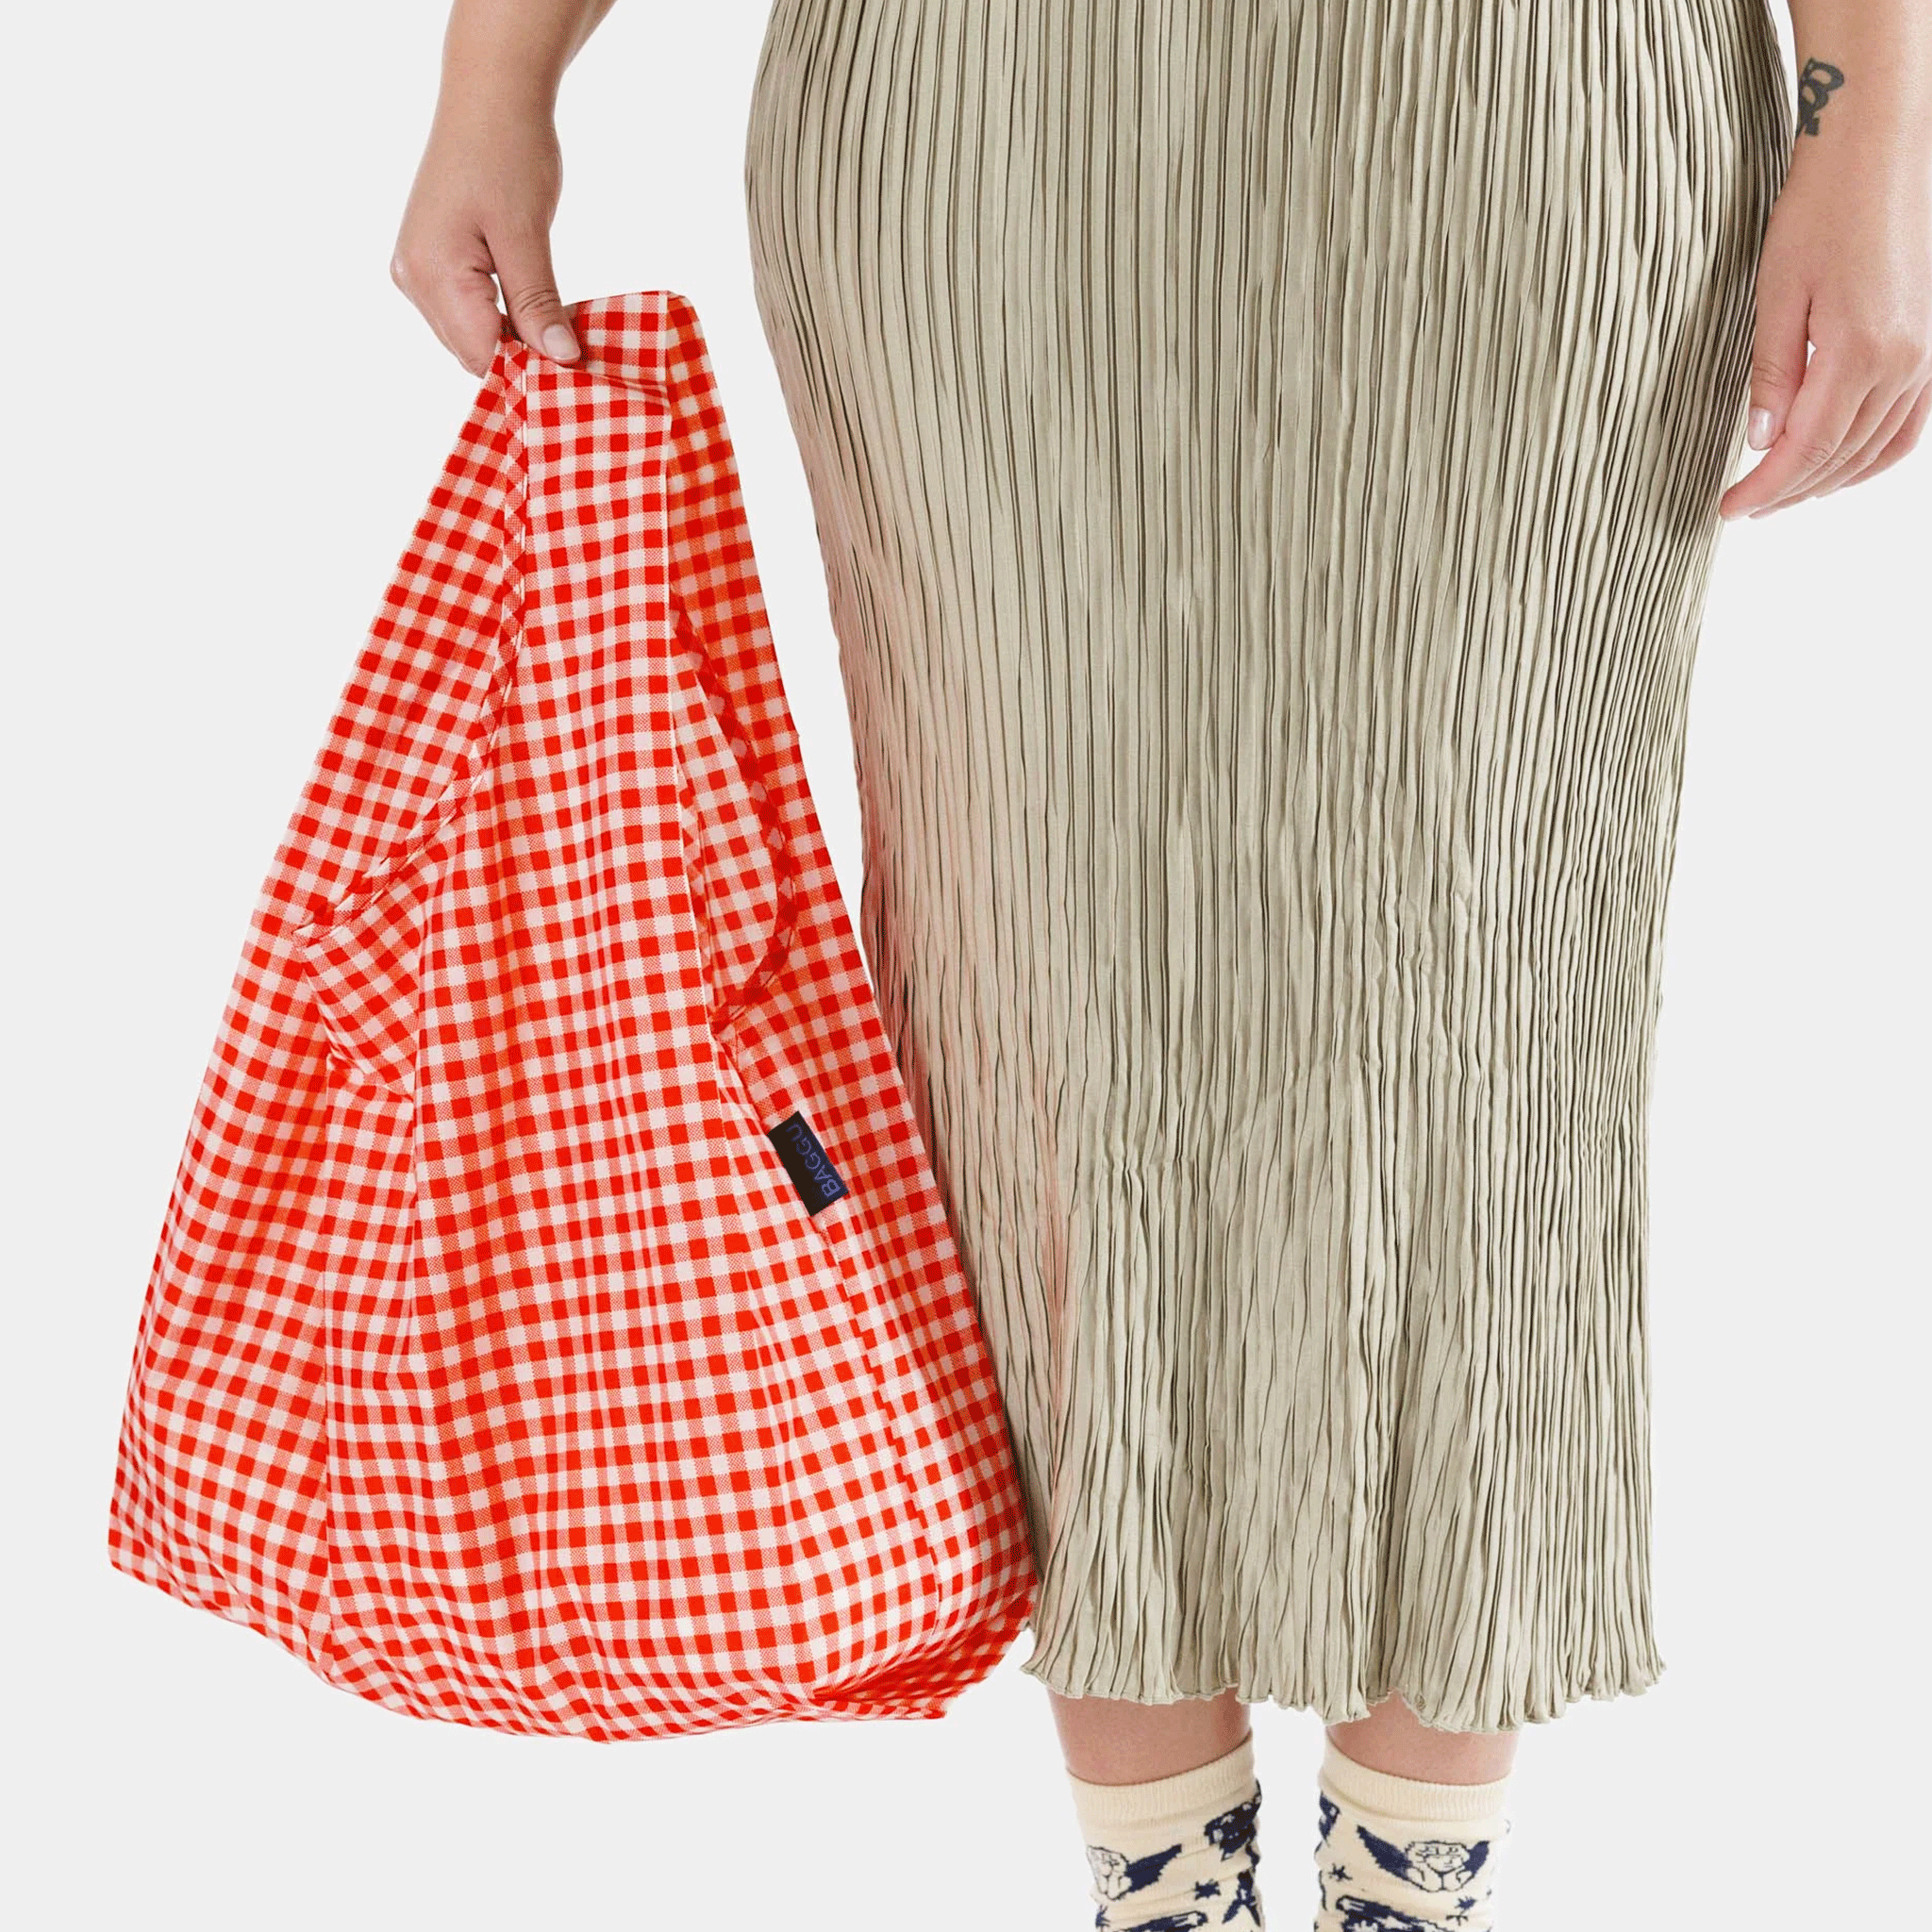 On a white background is a model holding a red gingham standard baggu nylon tote bag.